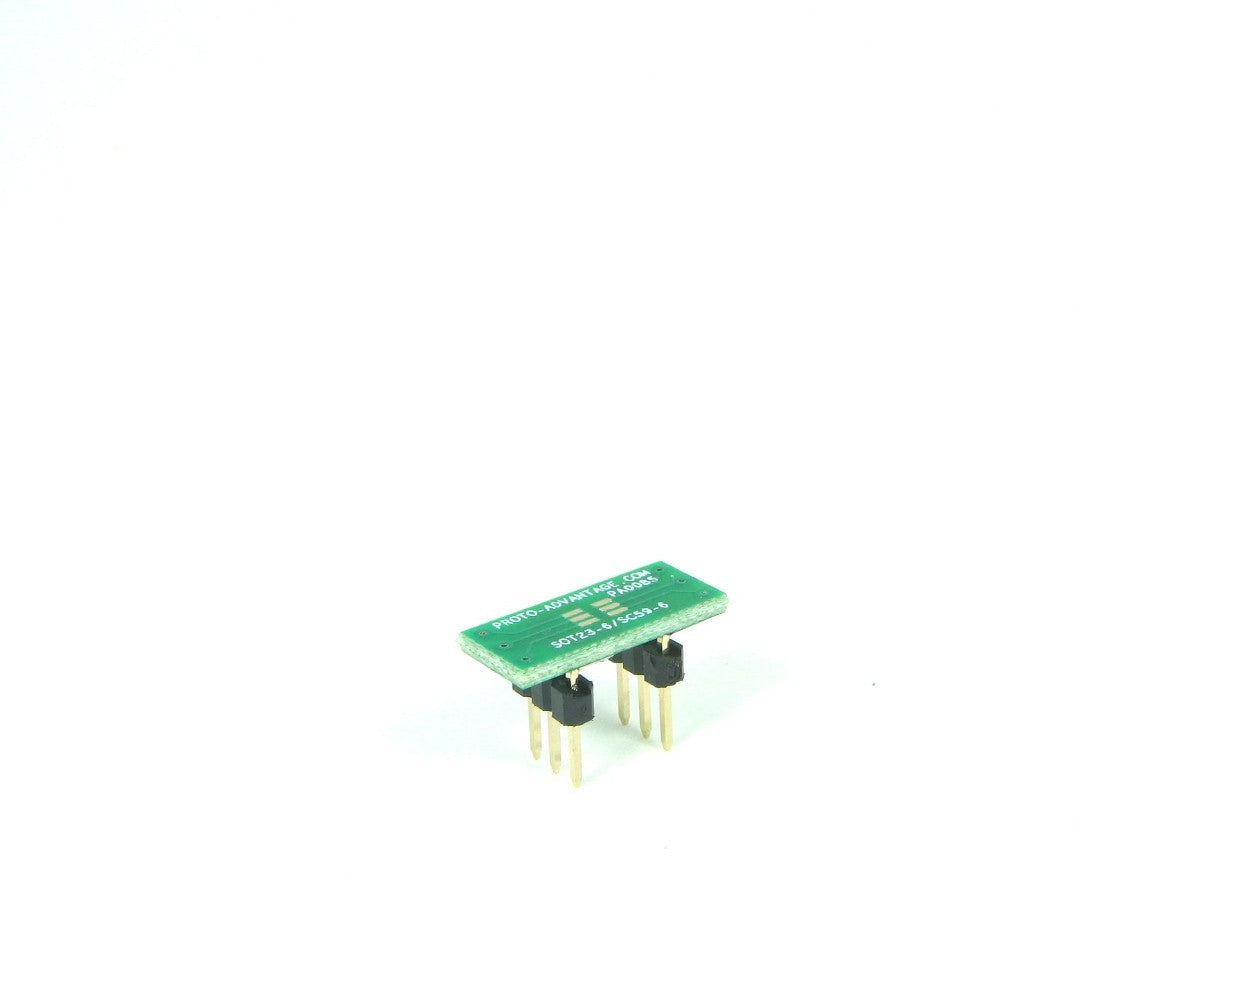 SOT23-6 to DIP-6 SMT Adapter (0.95 mm pitch)